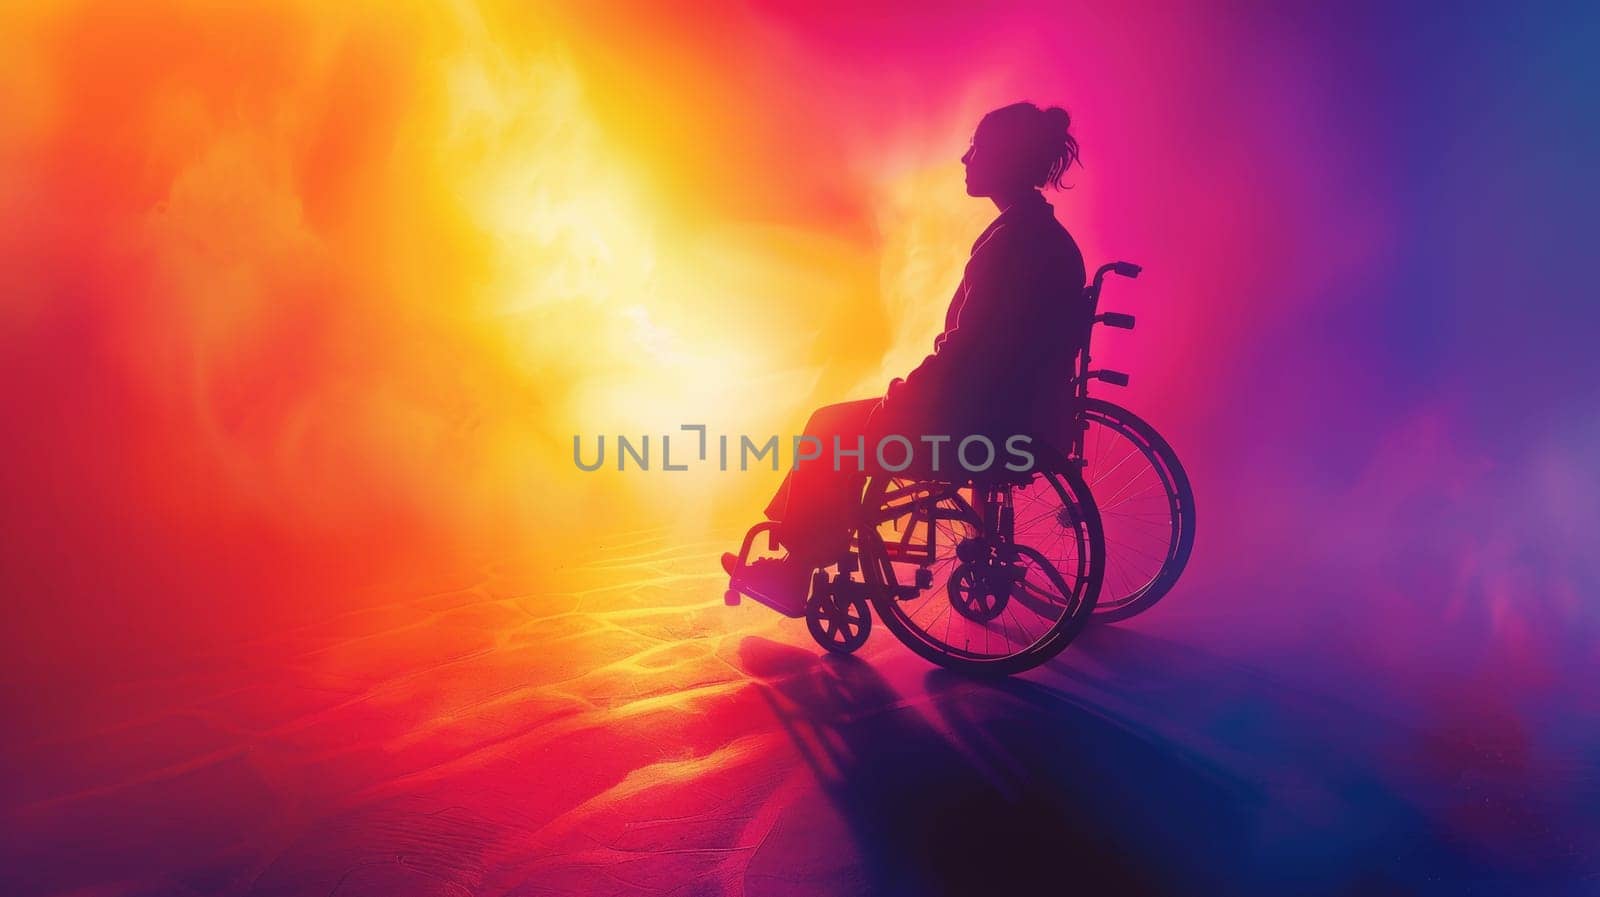 A silhouette of a woman in wheel chair with colorful background